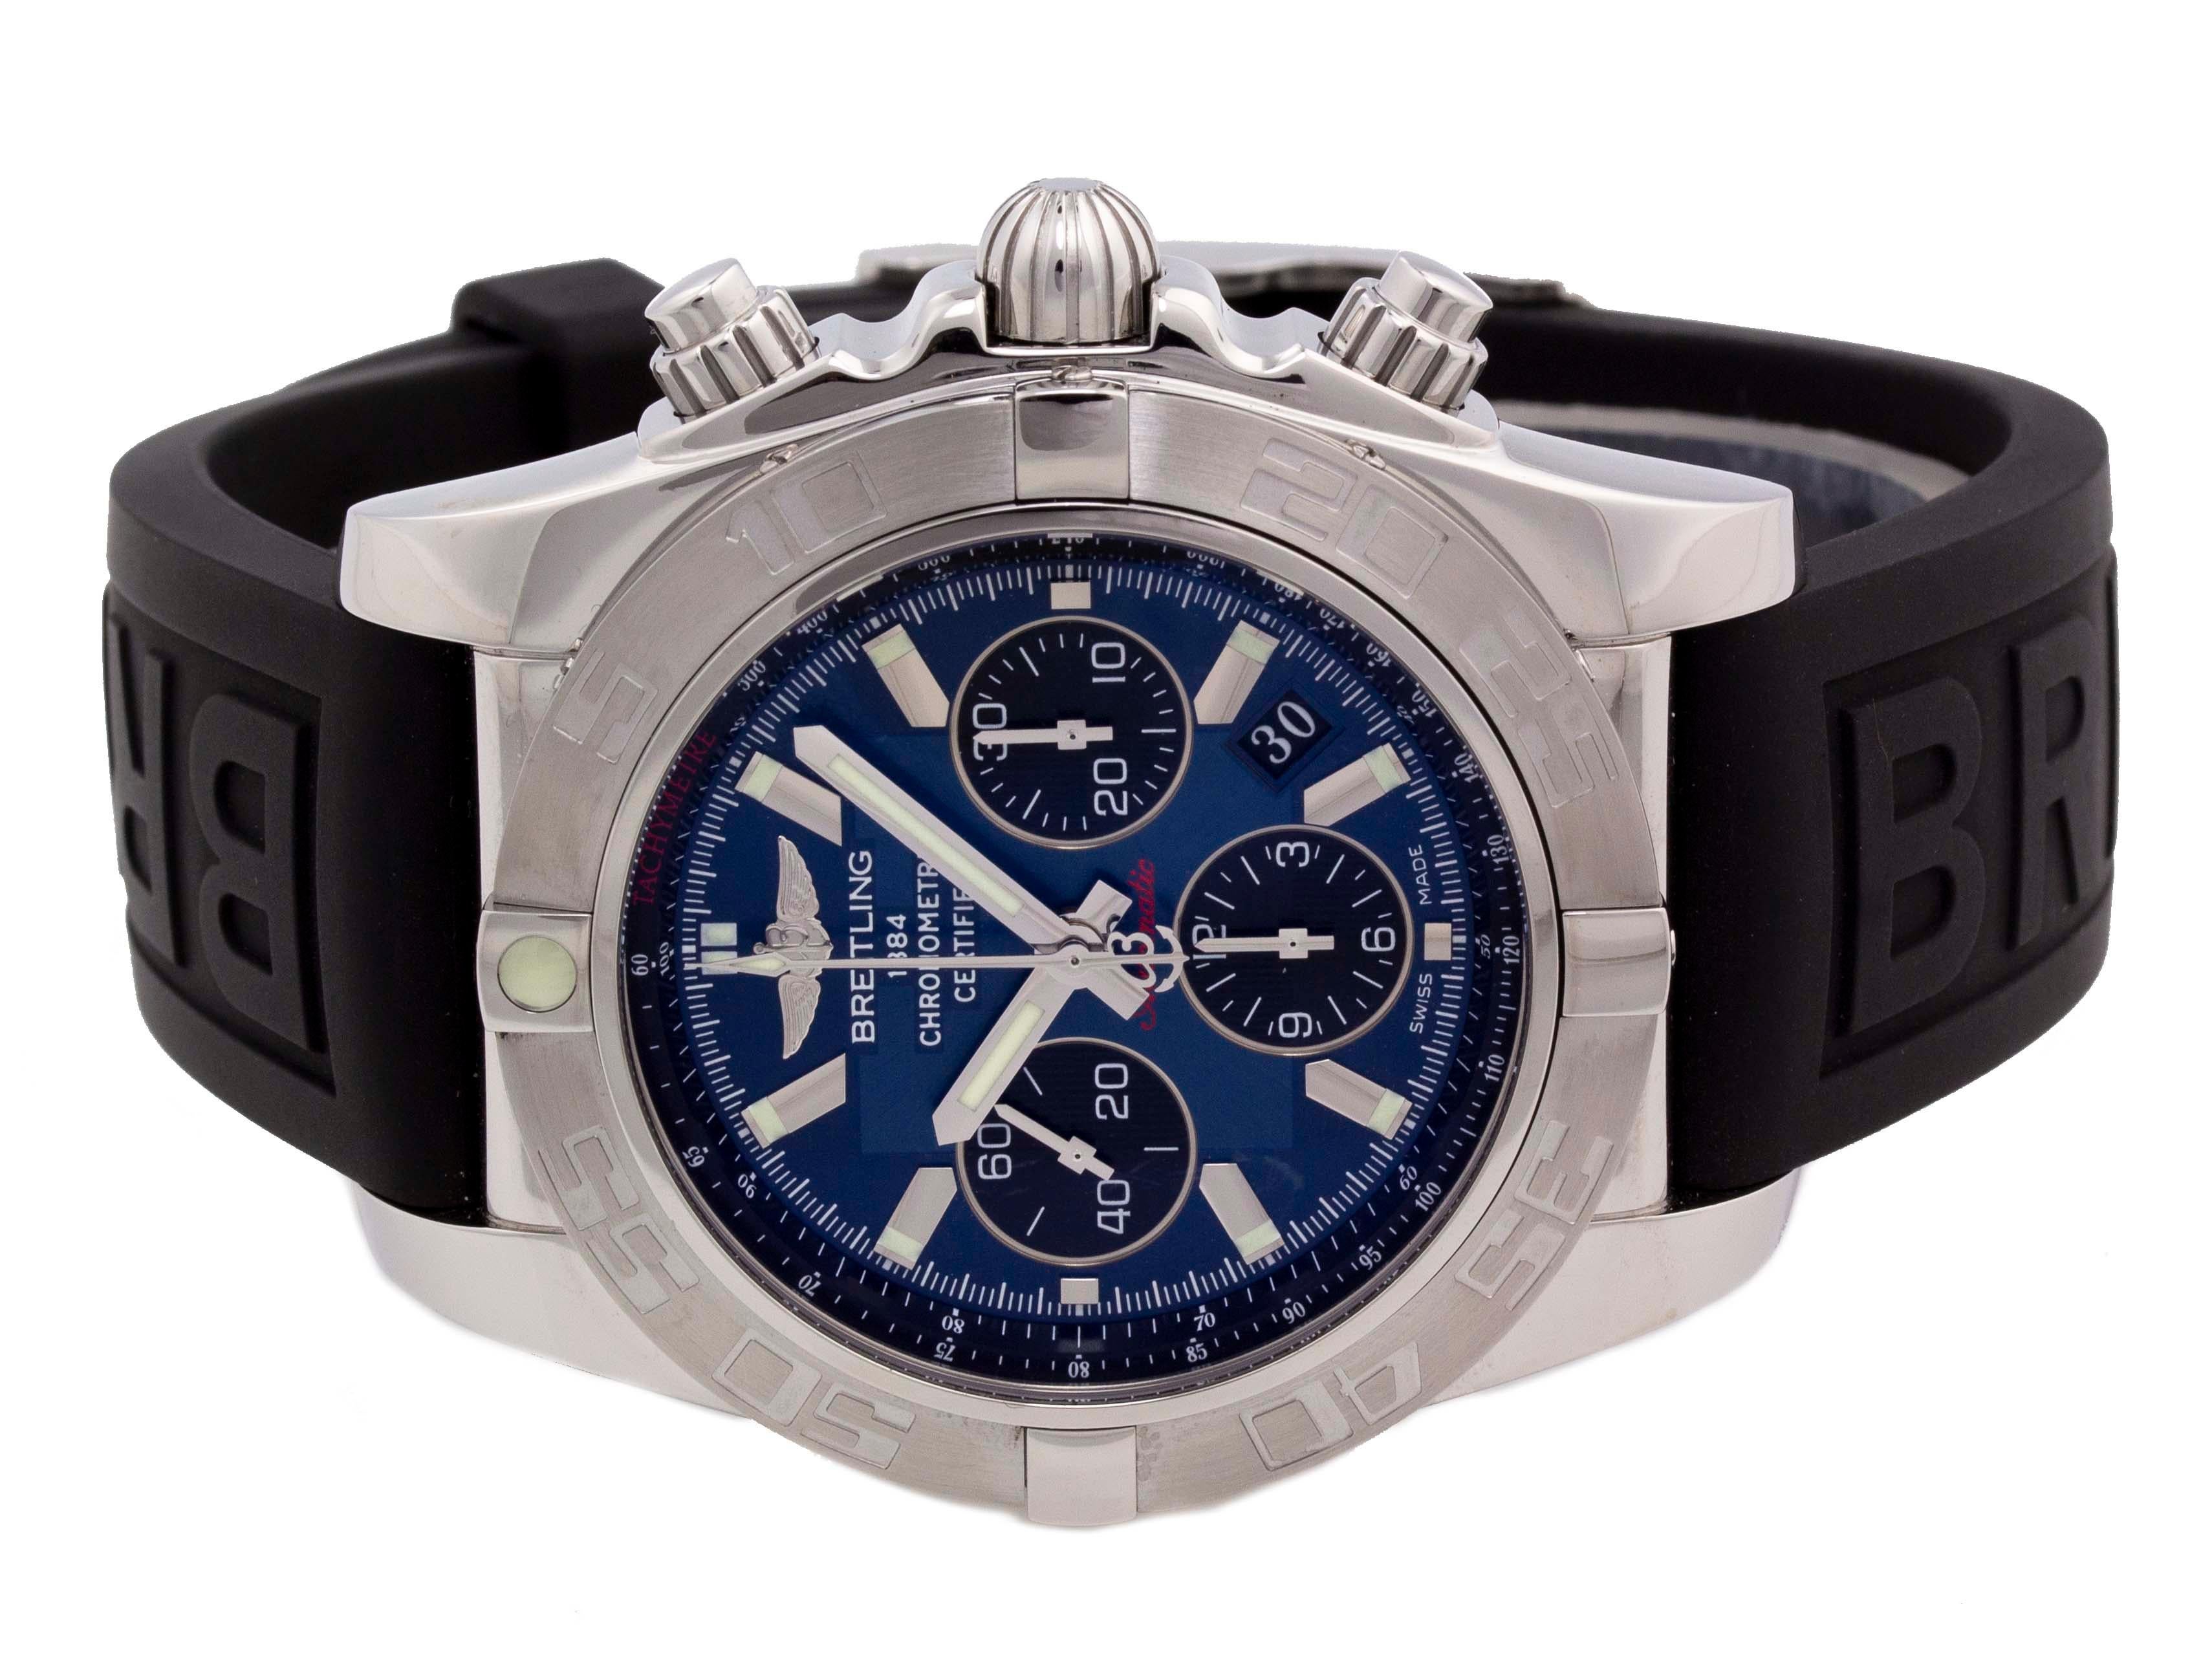 Brand	Breitling
Series	Chronomat 44
Model	AB011011/C789
Gender	Mens
Condition	Great Display Model, Faint Scratches on Bezel, Case, & Buckle
Material	Stainless Steel
Finish	Polished
Caseback	Solid
Diameter	44mm
Thickness	17mm
Bezel	Unidirectional